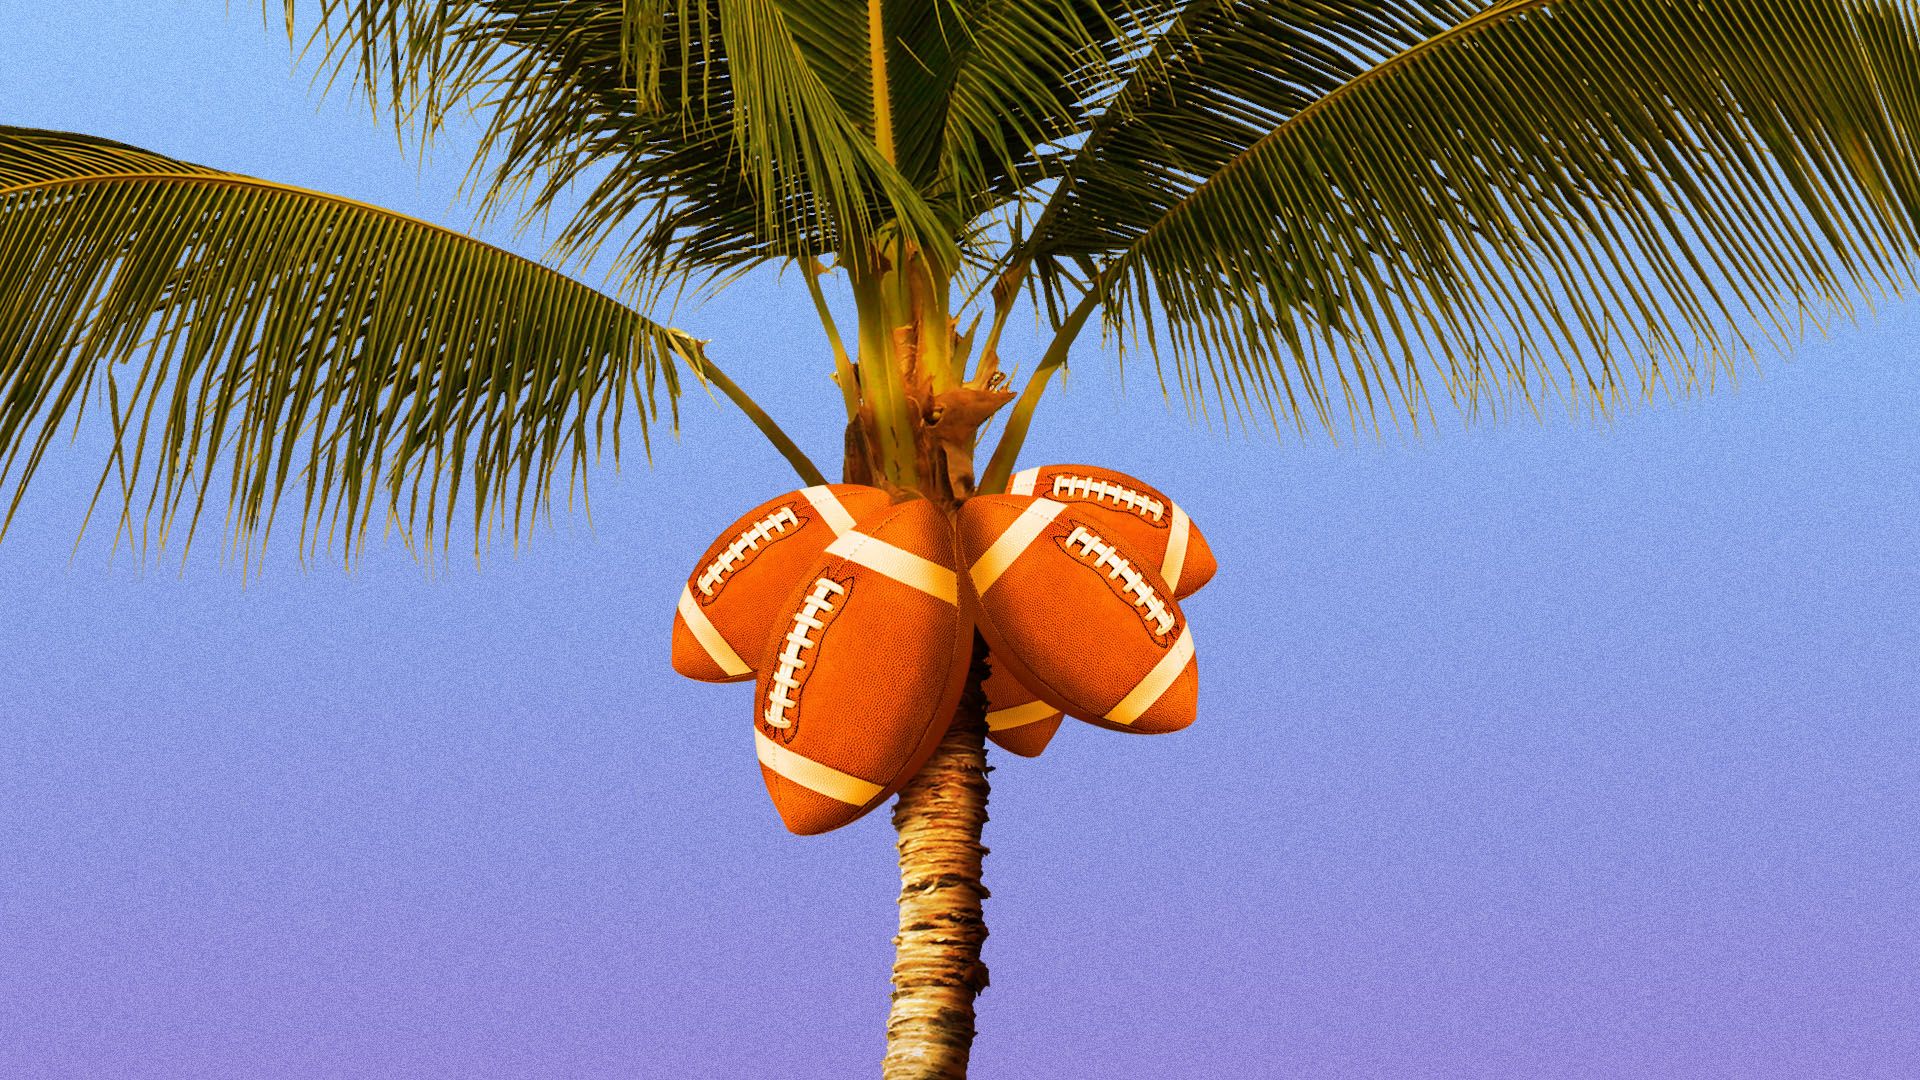 Illustration of a palm tree with footballs for coconuts